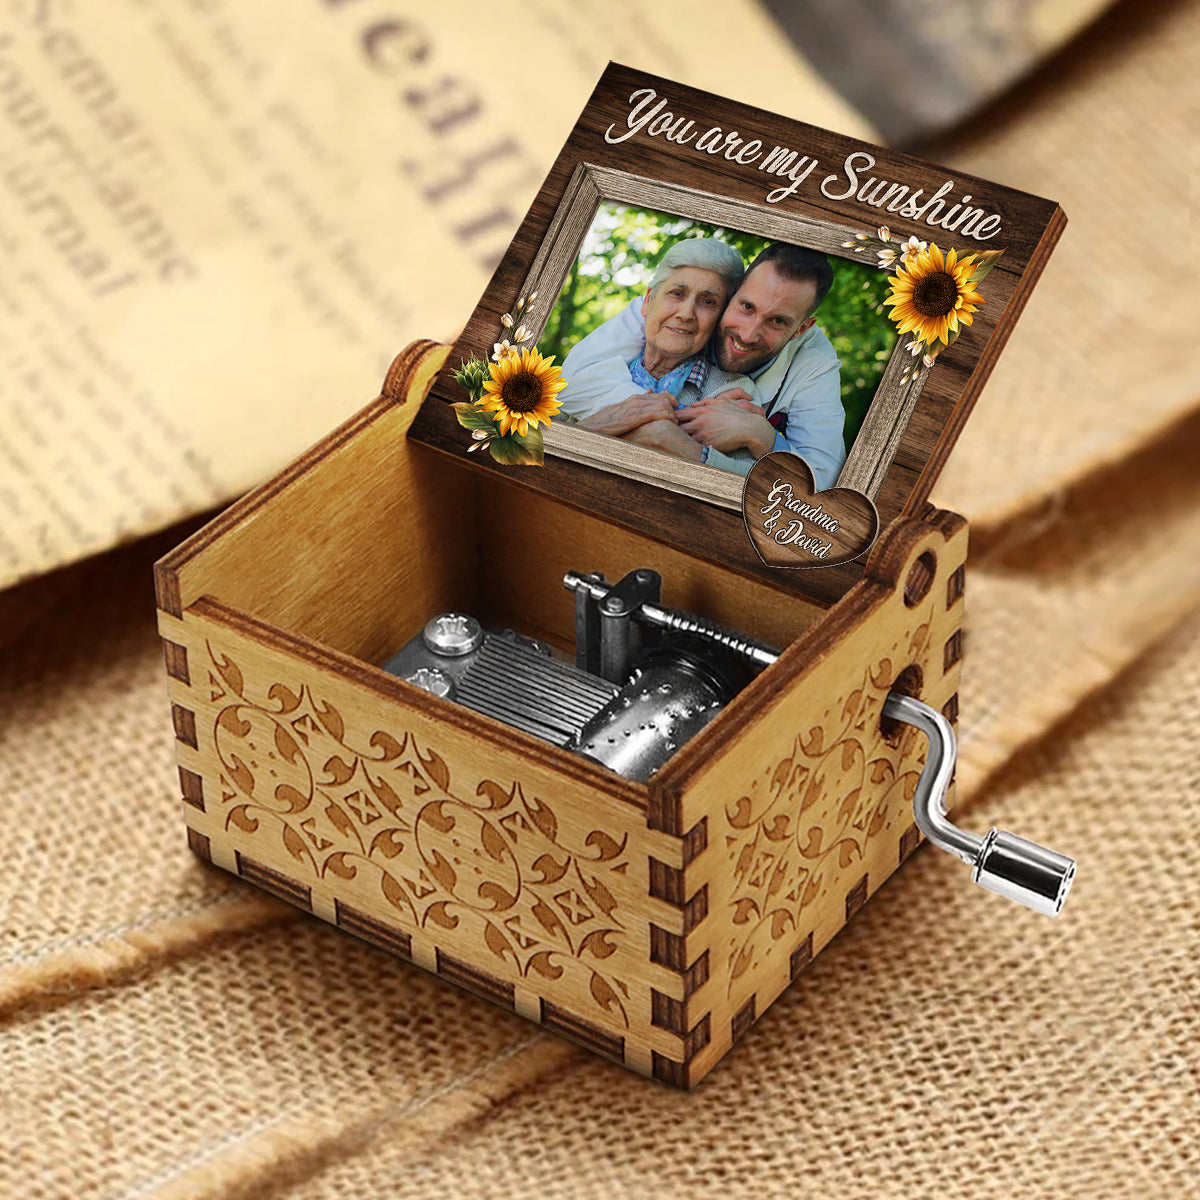 You Are My Sunshine - Gift for mom, grandma, grandpa, daughter, son, granddaughter, grandson, friend, sister, brother, aunt, uncle, dad - Personalized Hand Crank Music Box